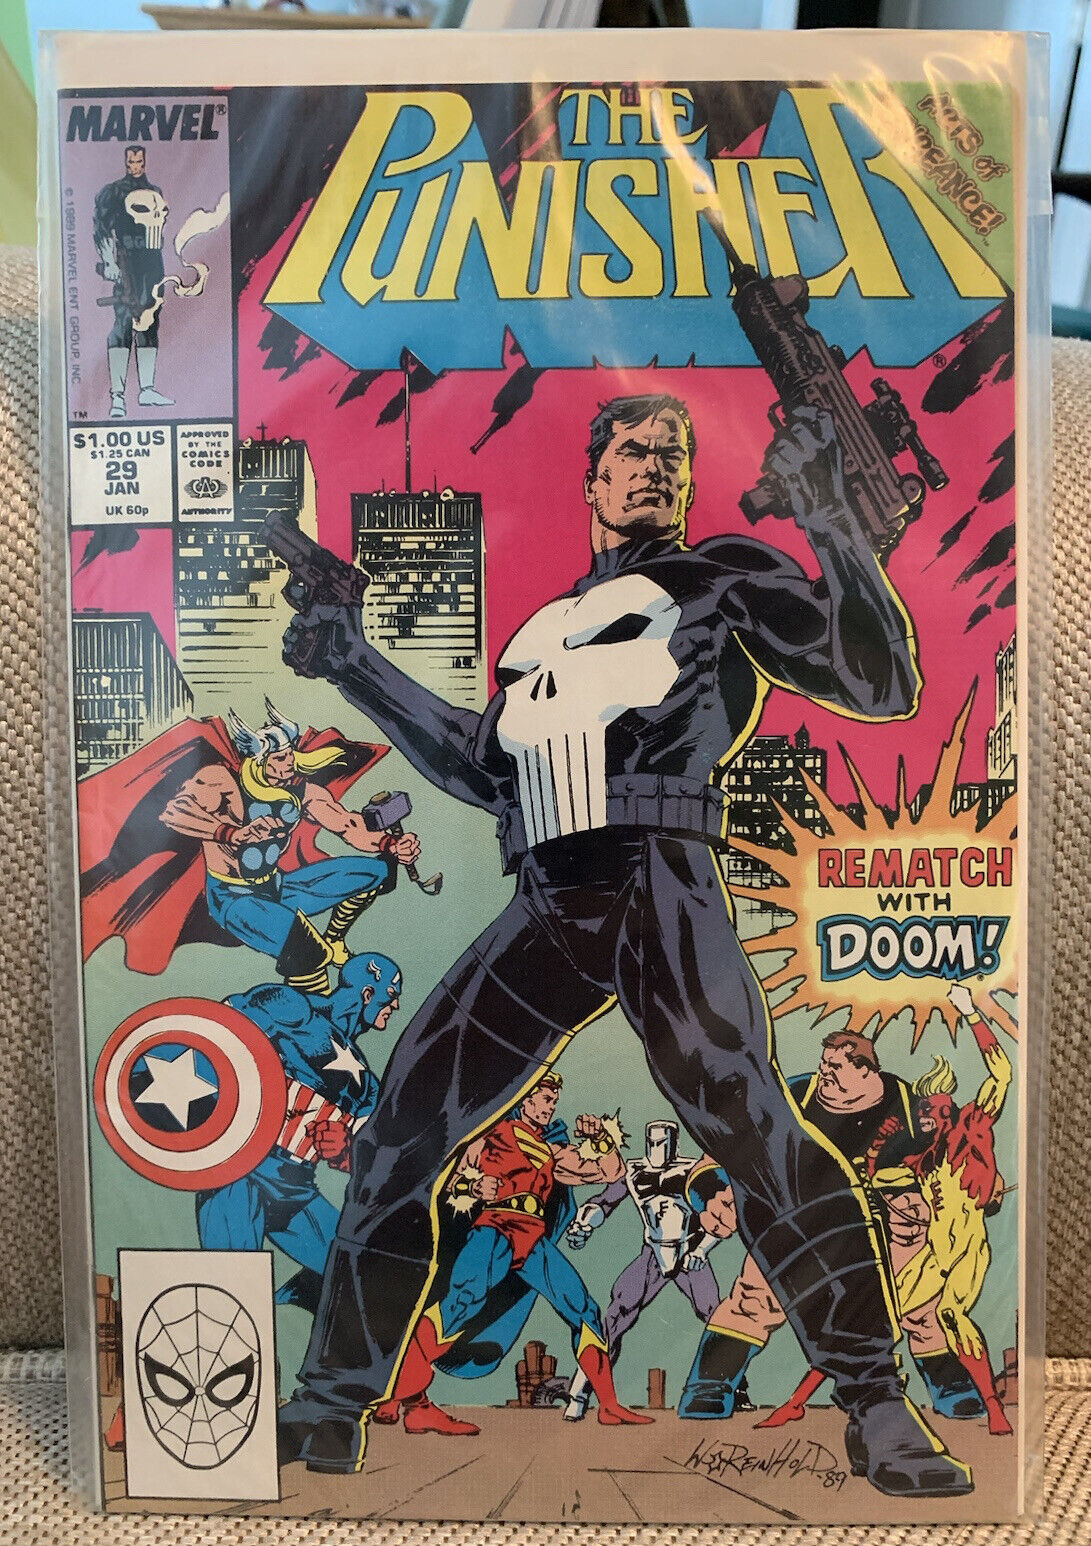 Marvel Comics The Punisher: Rematch With Doom #29 January 1989